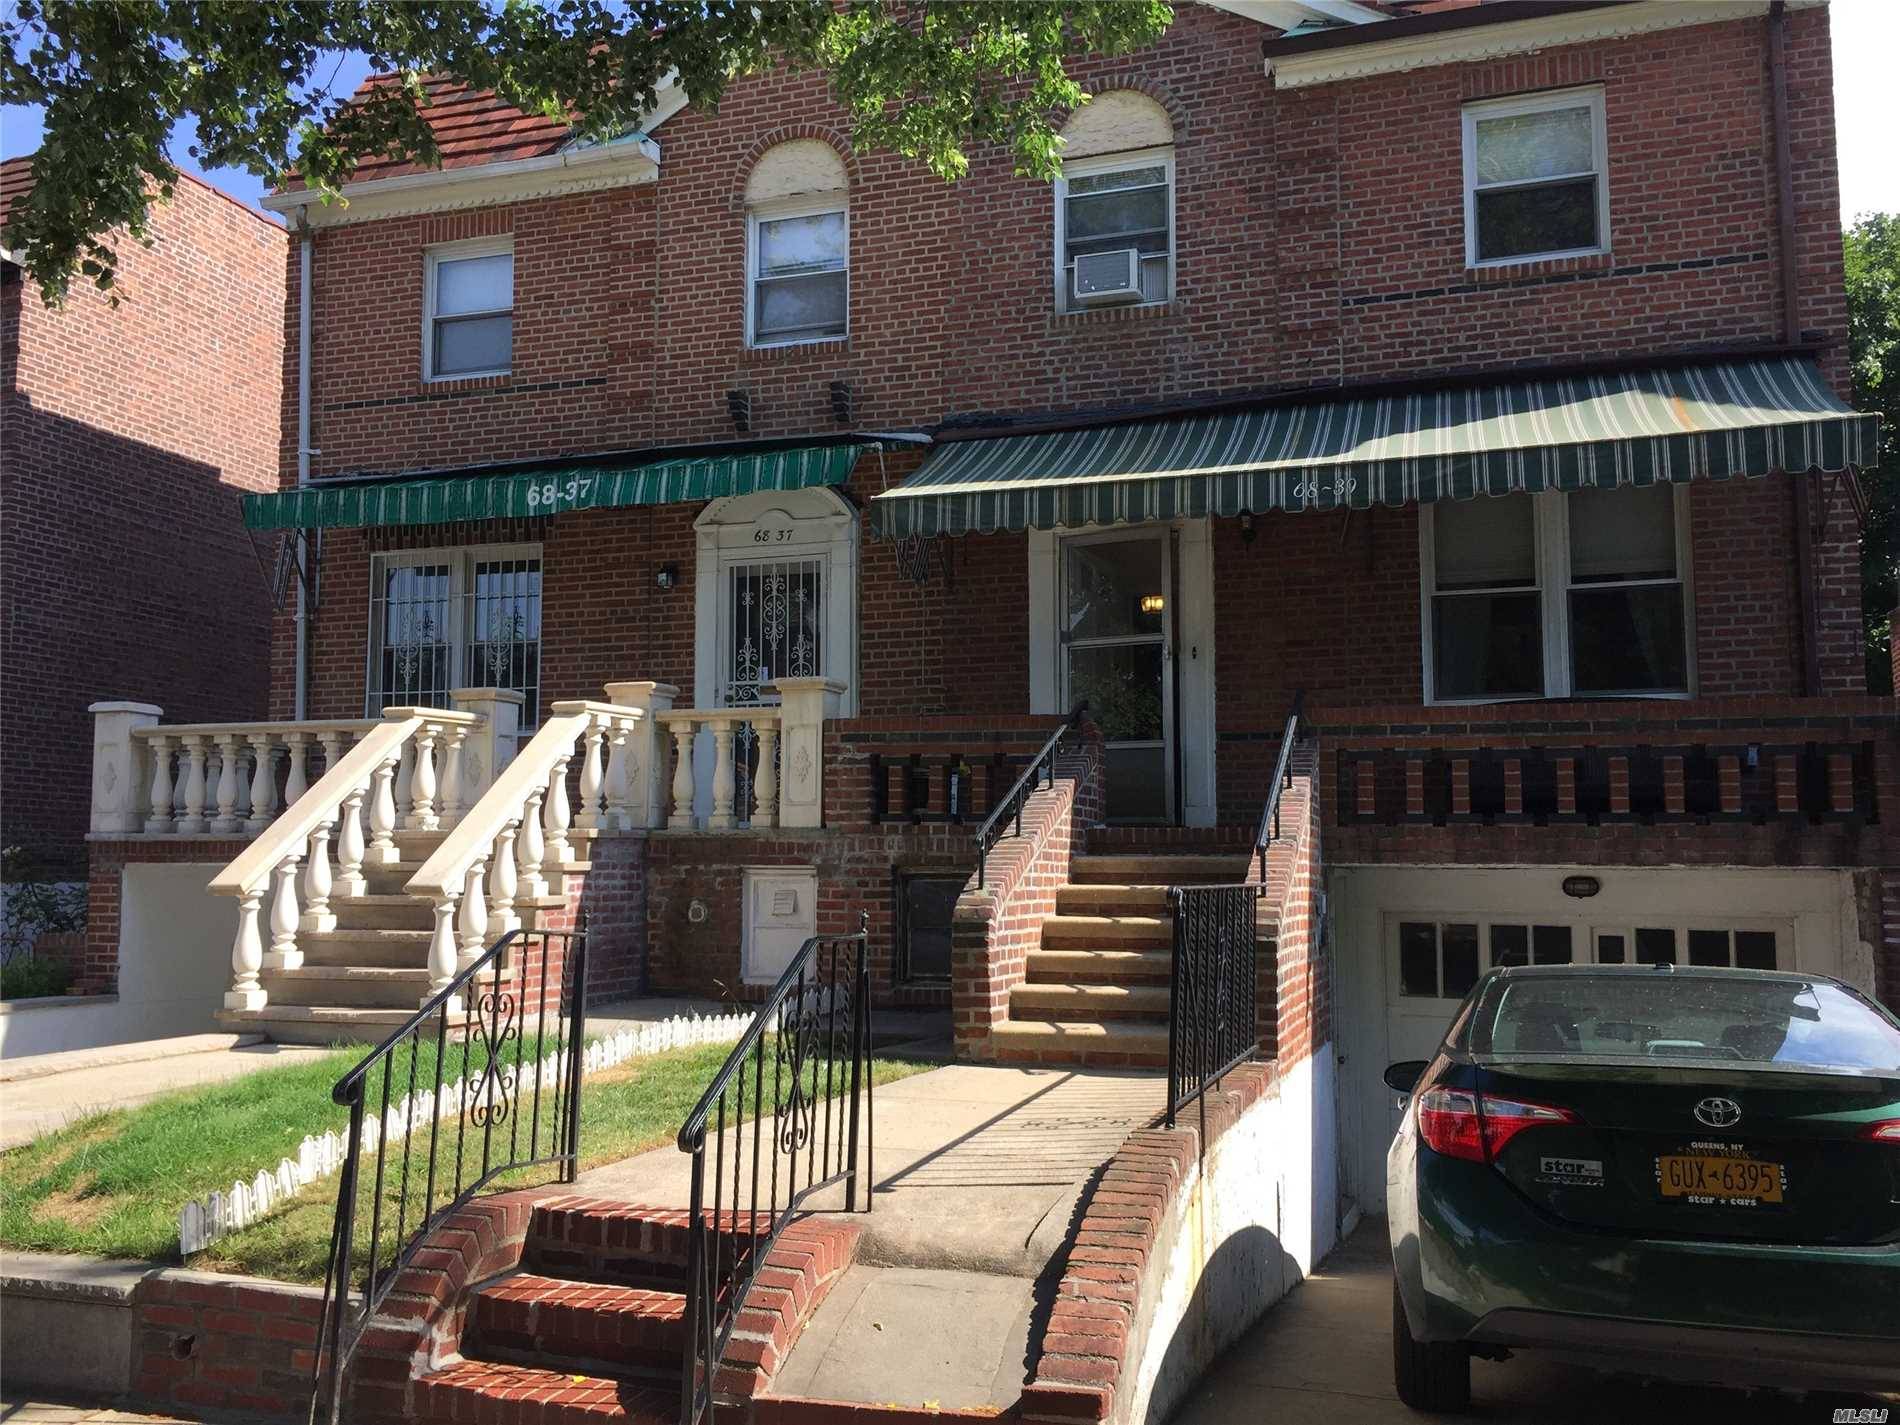 3 BR House Forest Hills LIC / Queens